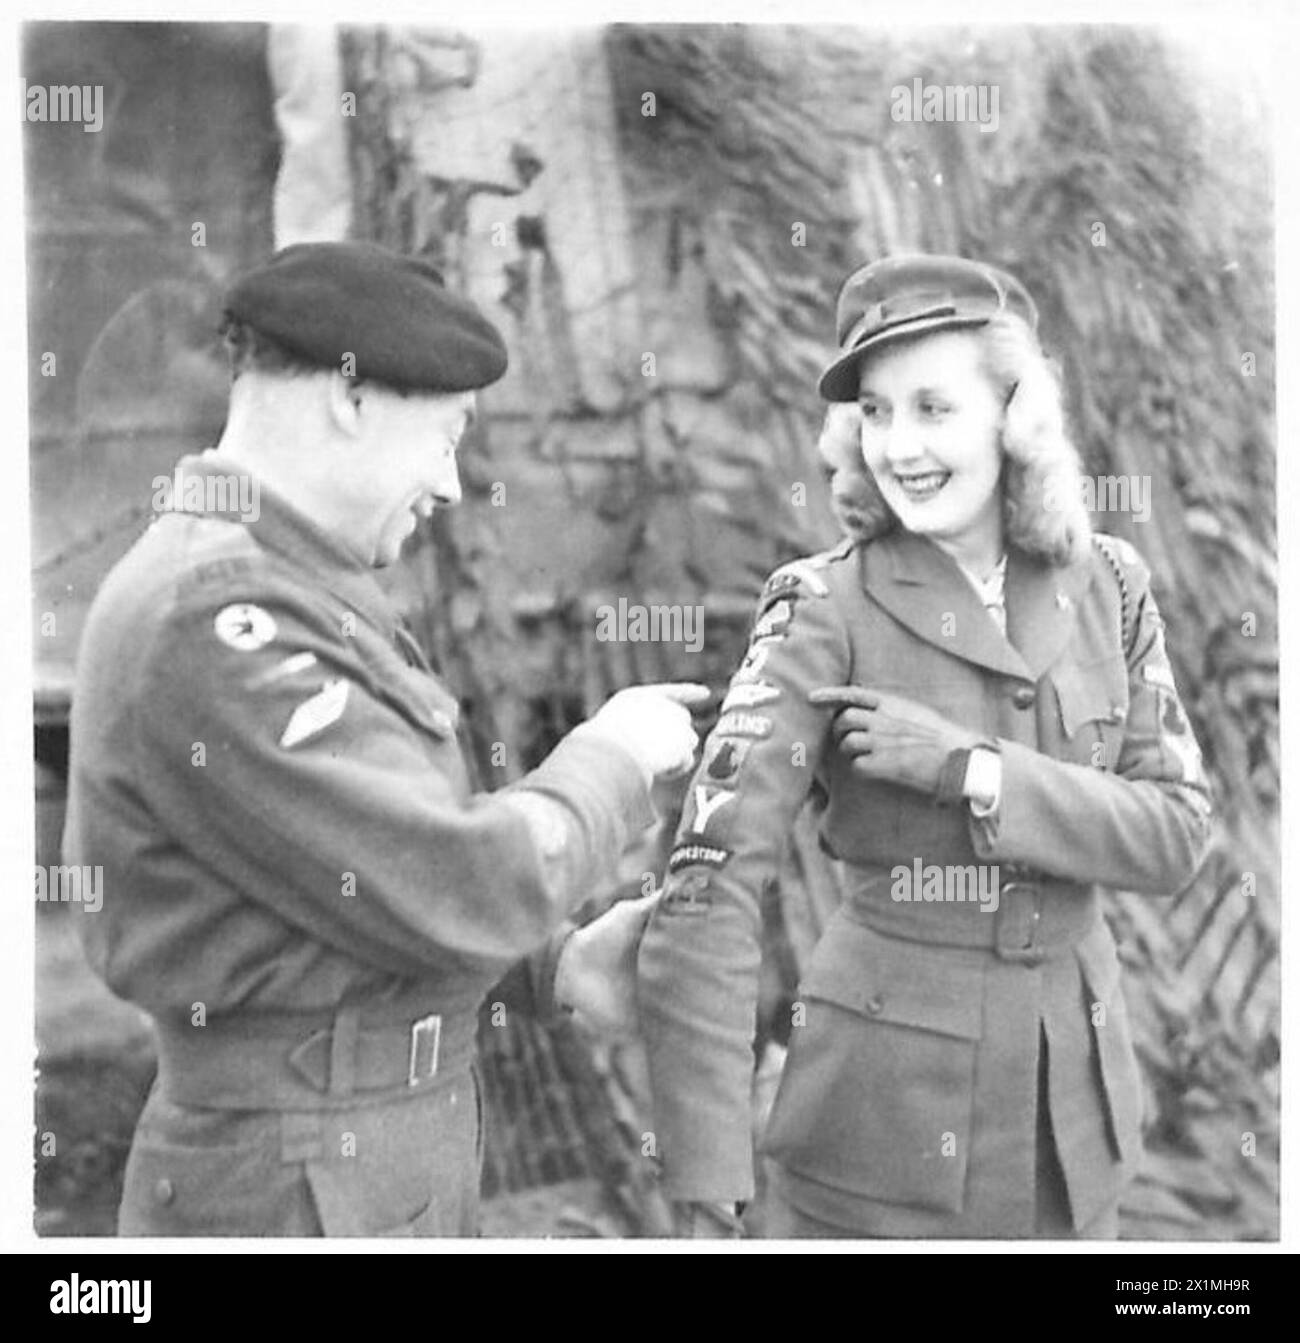 CANADIAN SINGER ENTERTAINS TROOPS - Miss Inga Andersen, known as Canada's Sophisticated Songstree, and who has been giving shows with her accompanist, Hal Chambers, to the forward troops in Italy. RQMS H. Clare, 40 Bn. R.T.R - of 50 Out Lane, Woolton, Liverpool, inspects the regimental and divisional badges and signs given to Miss Andersen by the various units for whom she has sung. Each Division represented by the badges on Miss Andersen's arms have adopted her as their 'Forces Sweetheart', British Army Stock Photo